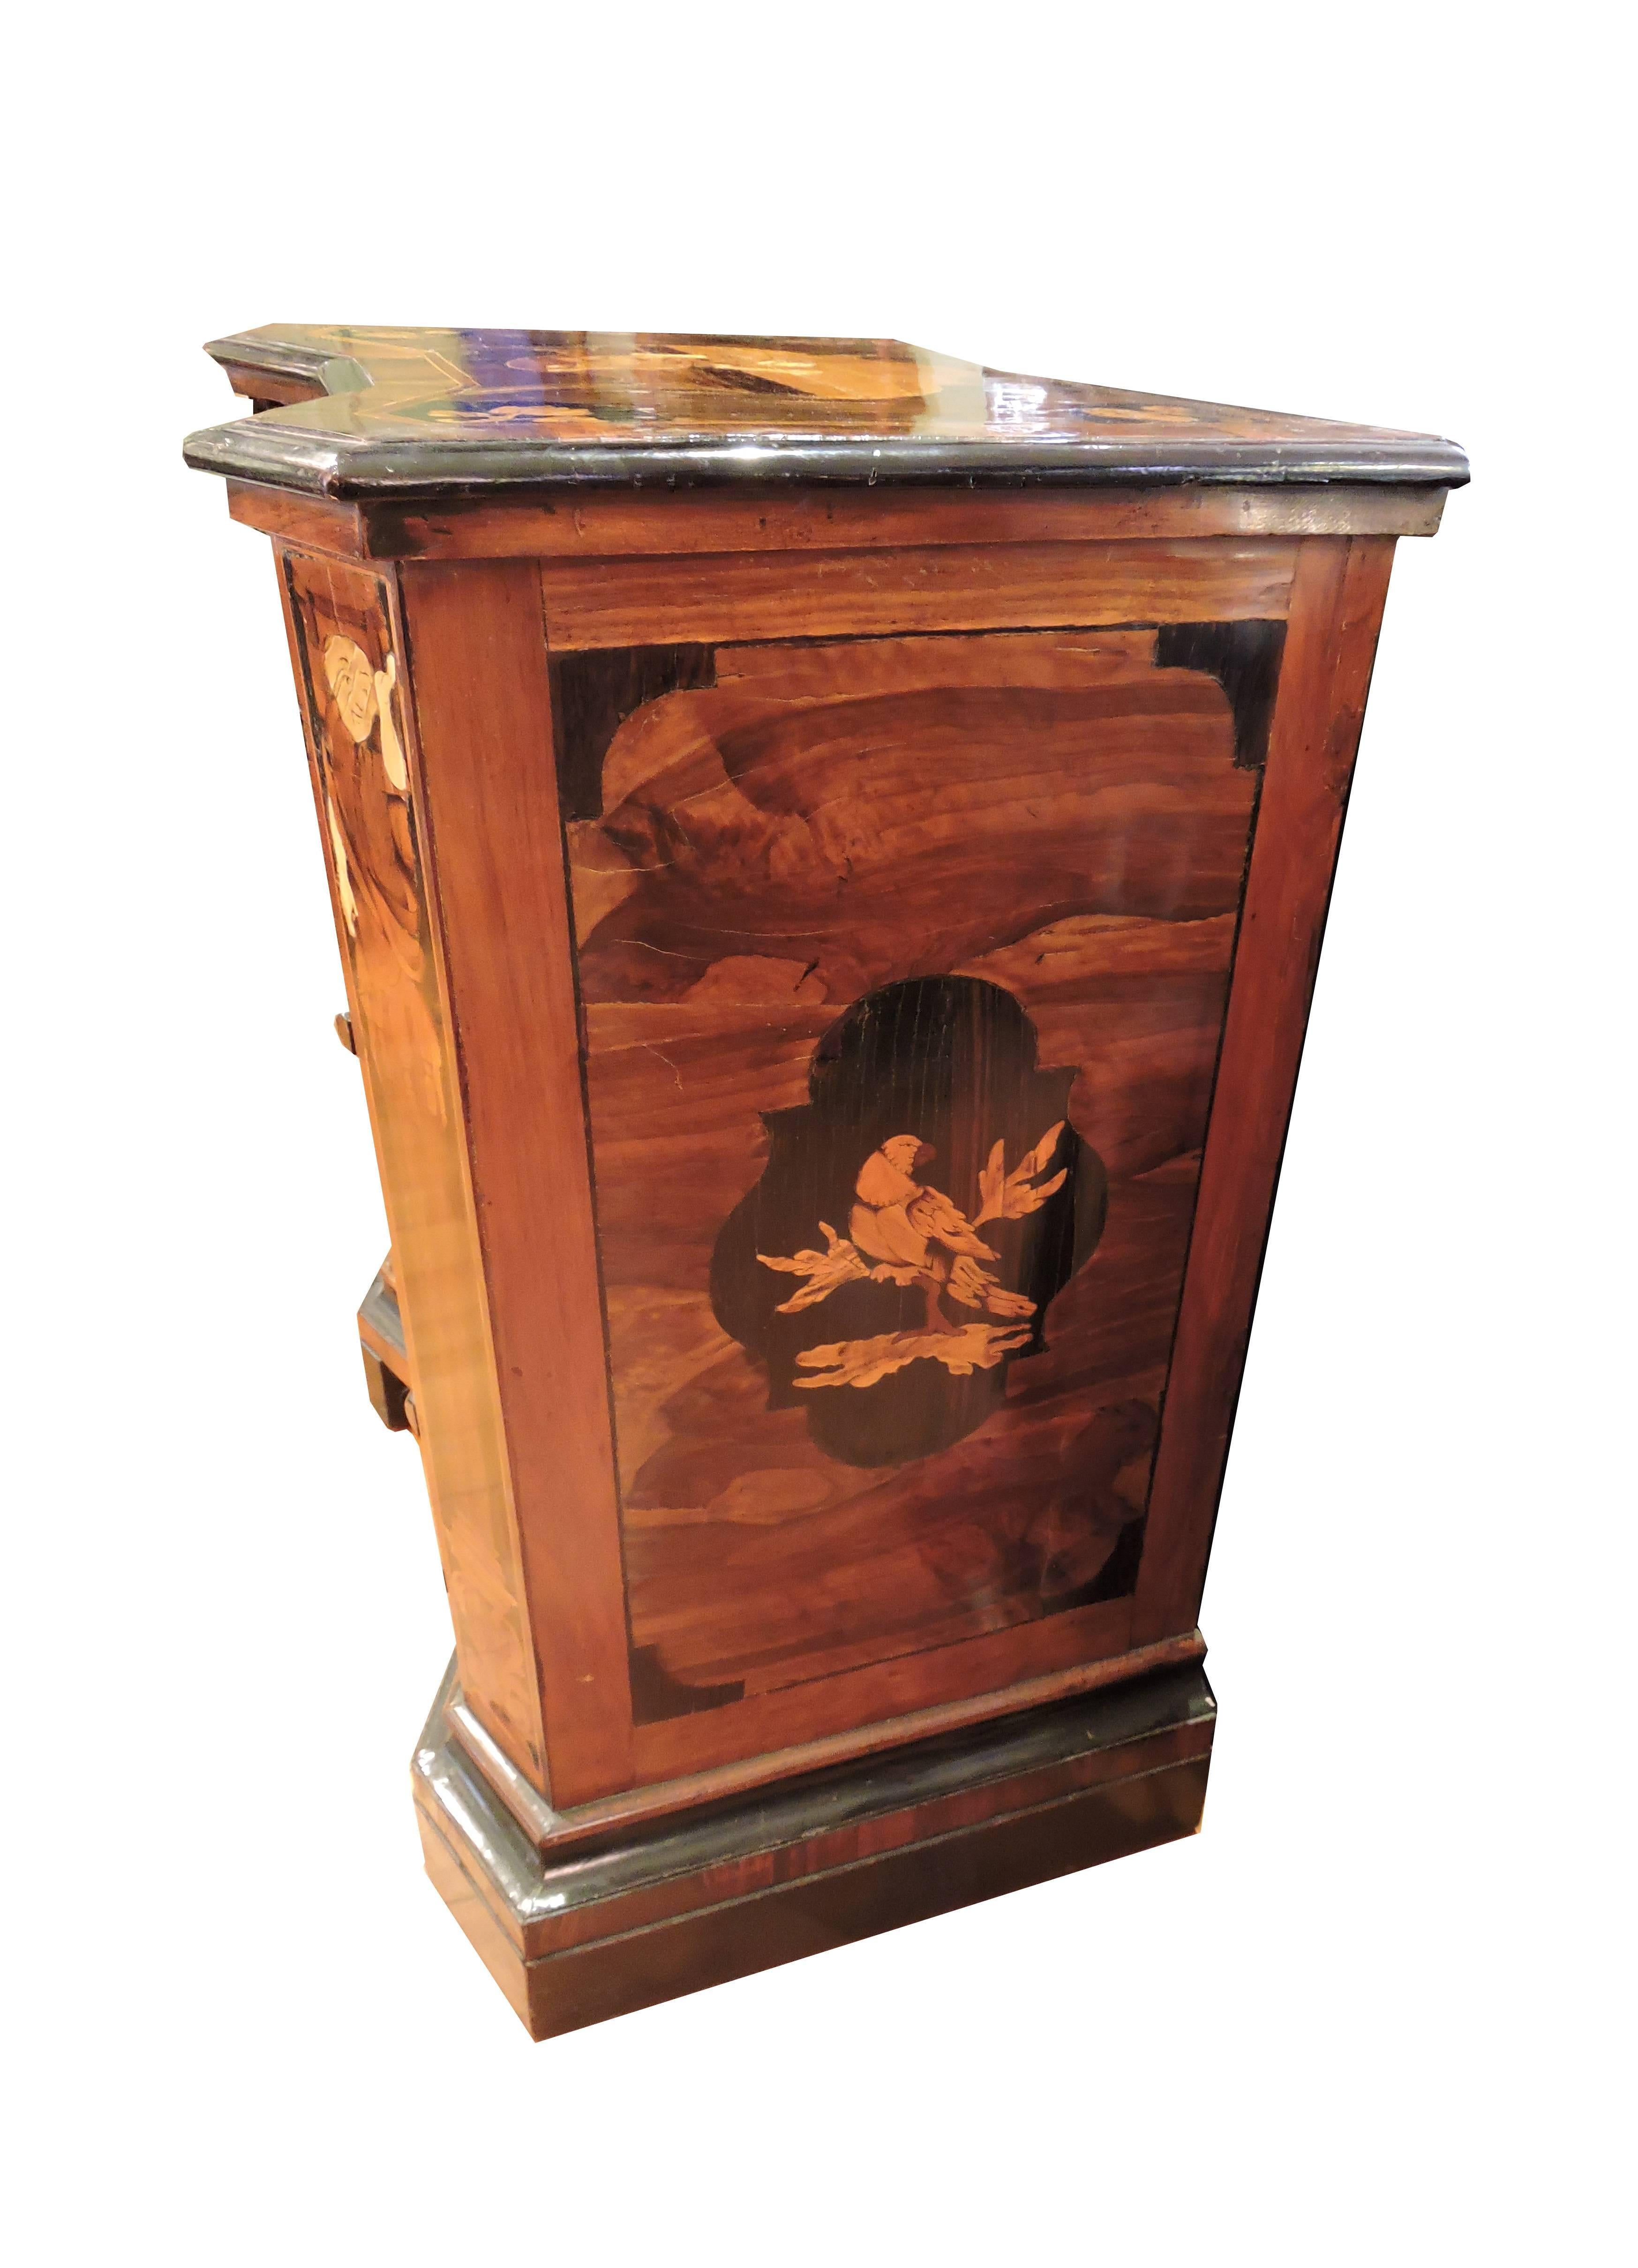 Italian 18th Century Walnut and Ebony Commode Inlaid with Bone and Fruit Woods For Sale 2